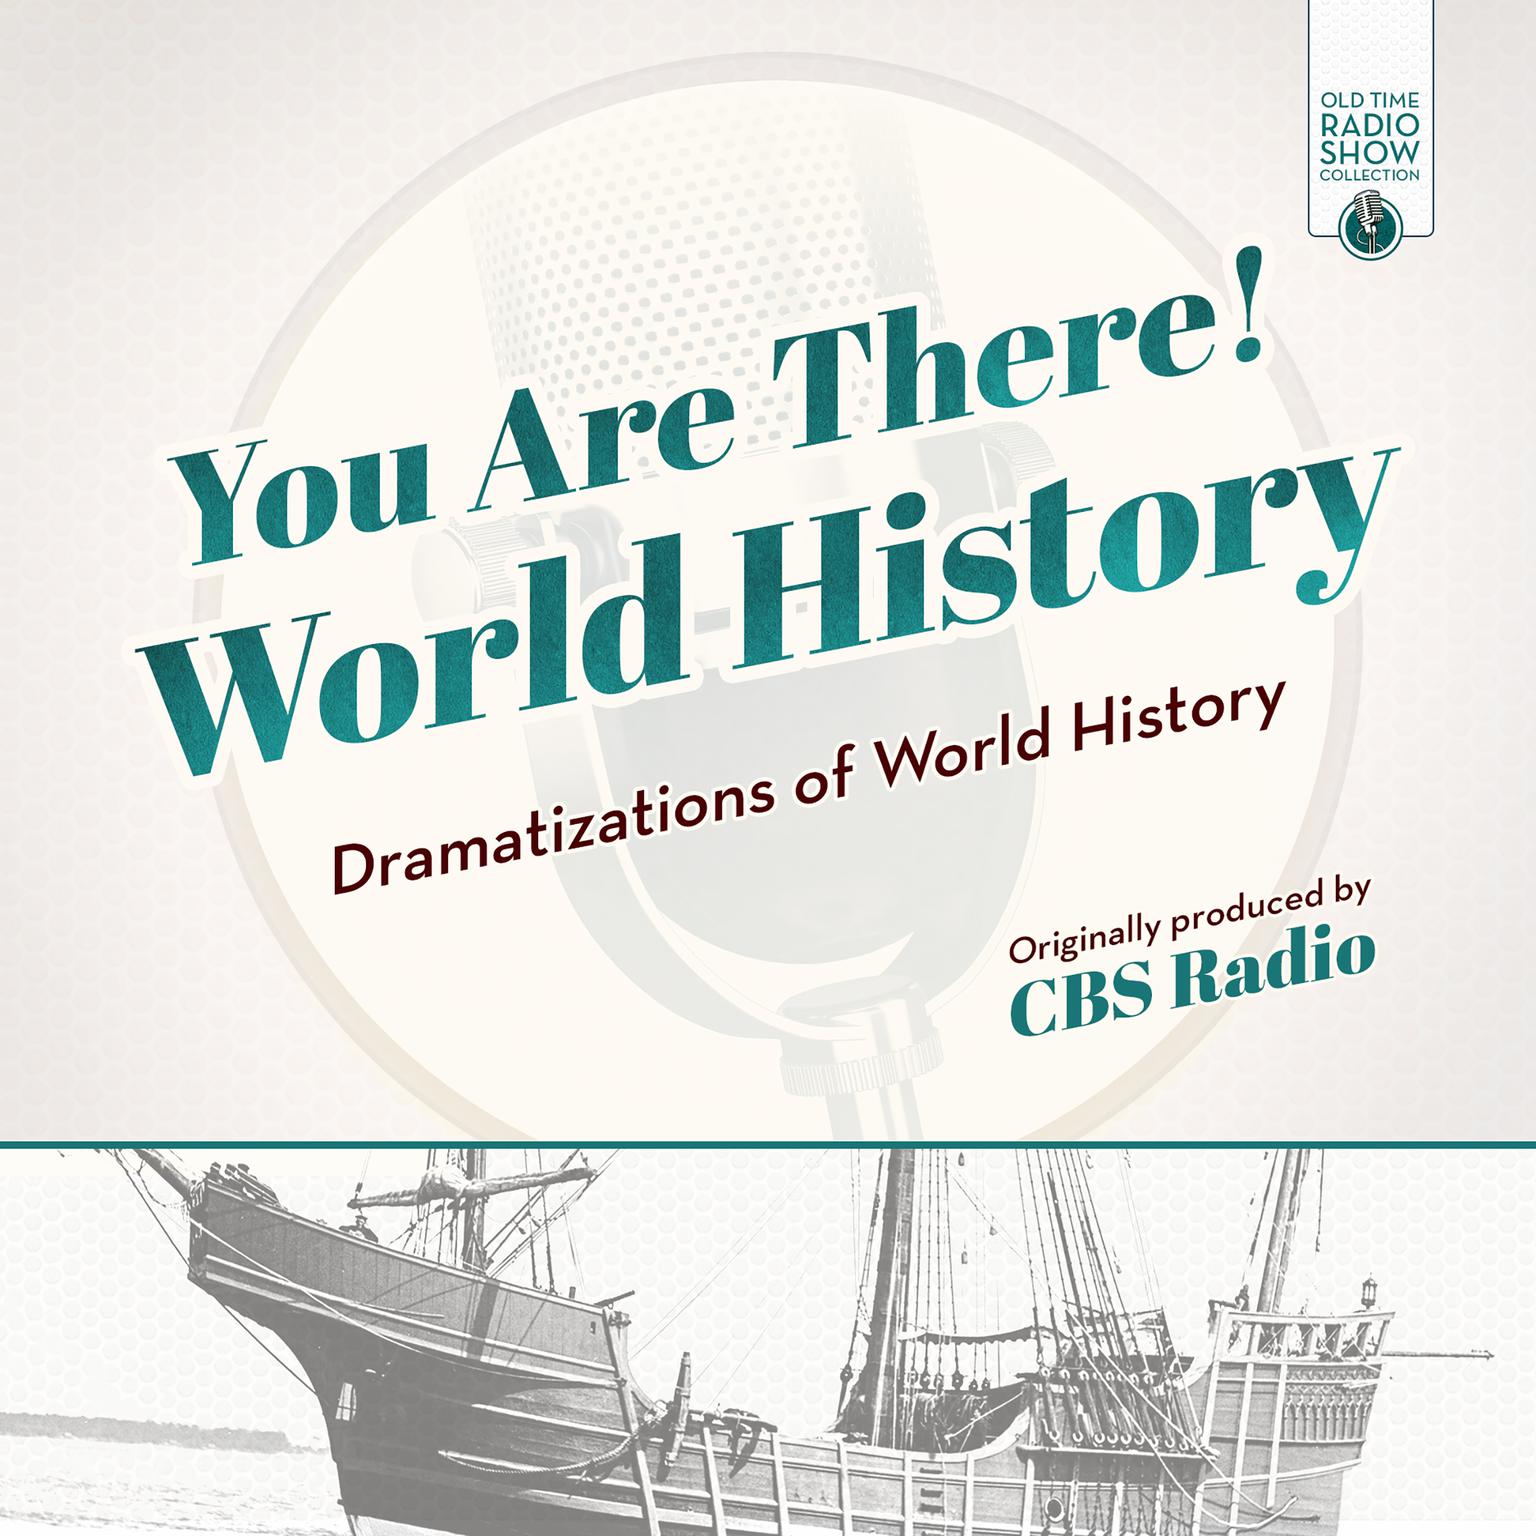 You Are There! World History: Dramatizations of World History Audiobook, by CBS Radio